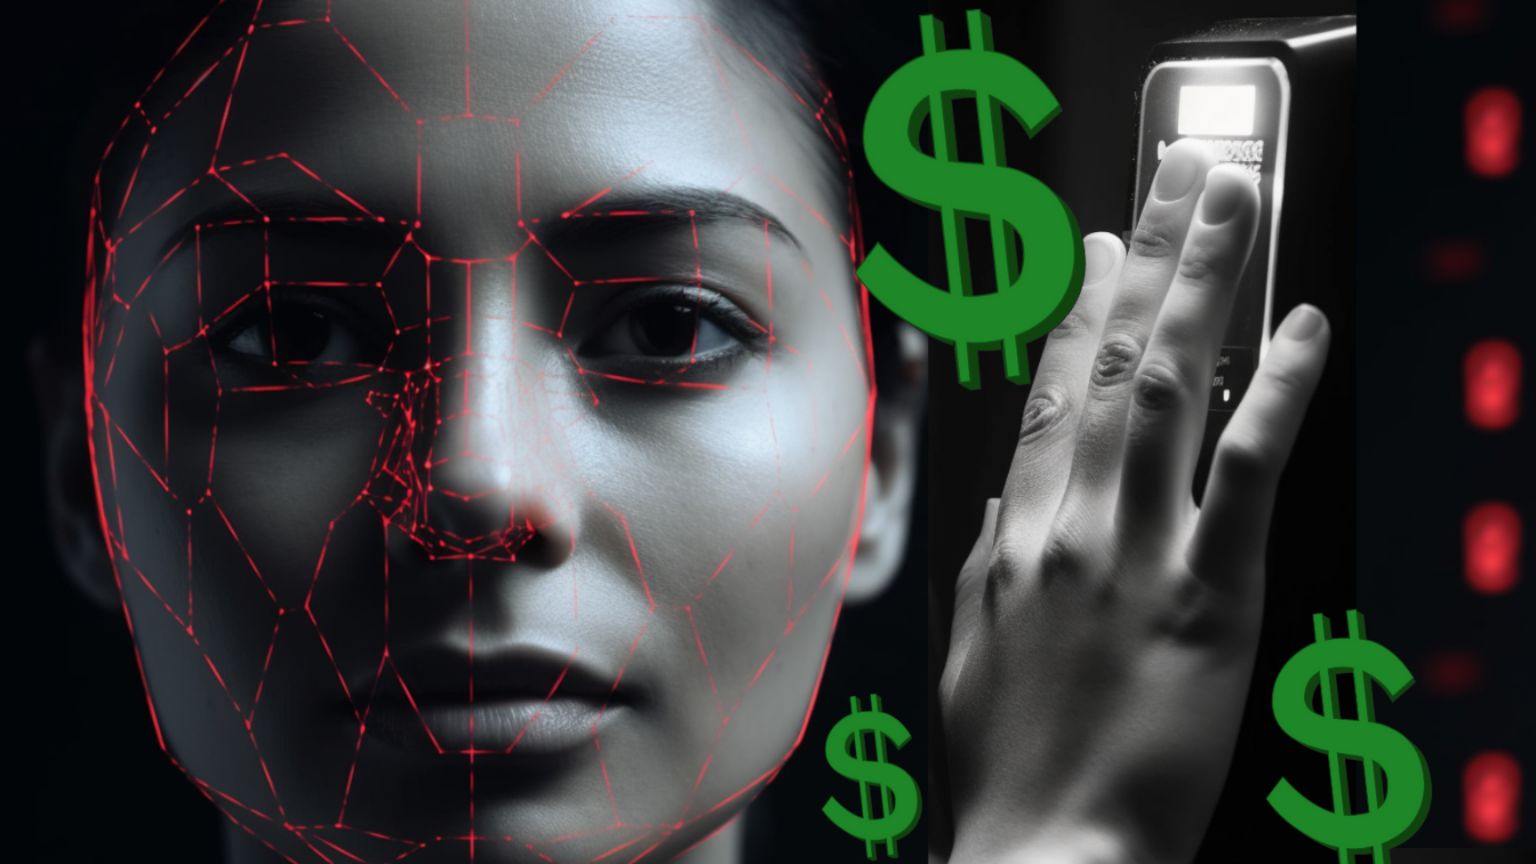 The corporate plot to normalize face and palm payments, harvest biometrics